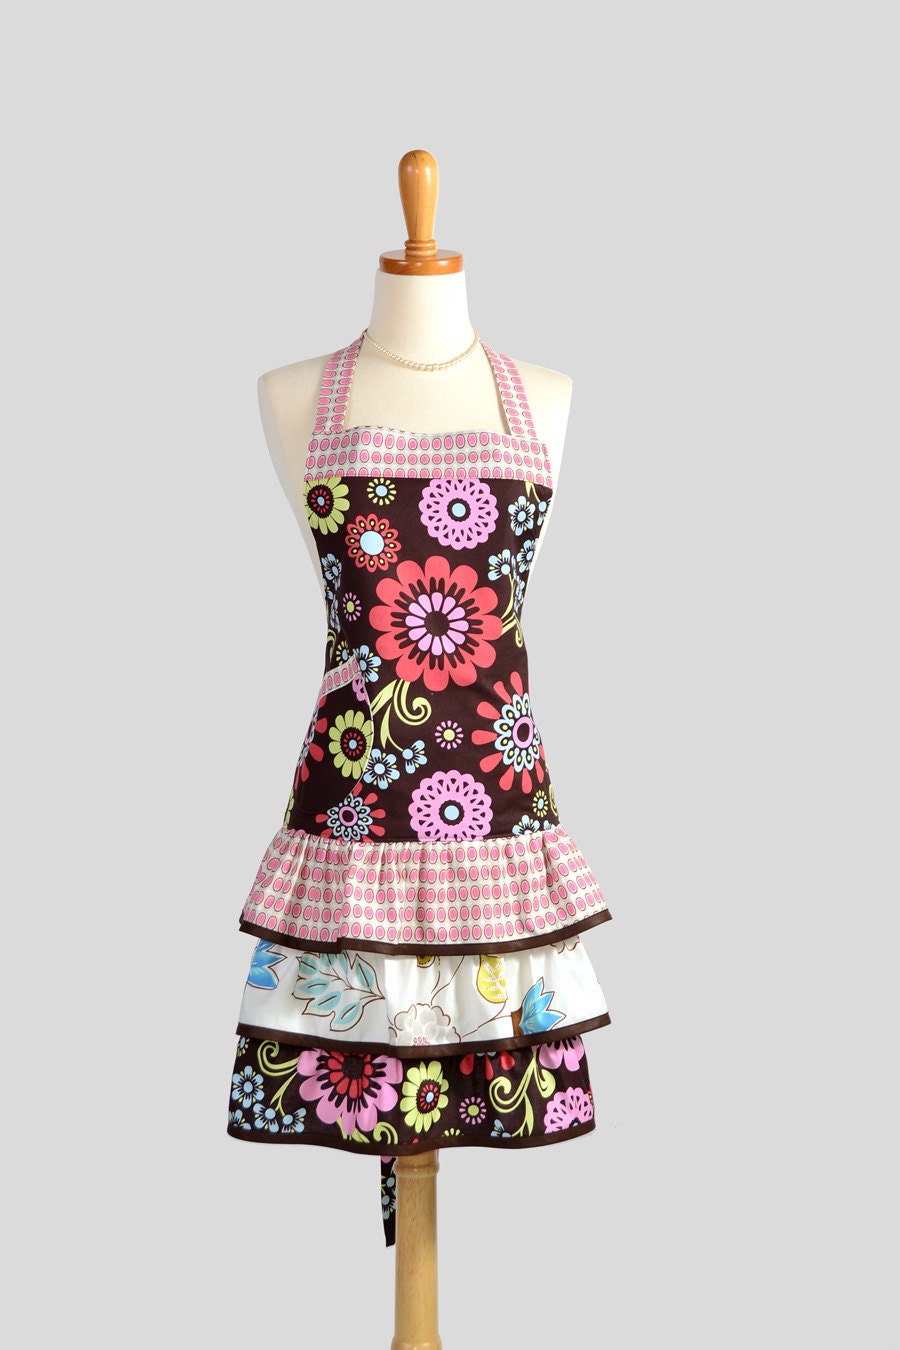 Ruffled Retro Apron . Flirty Full Womens Apron in Large Geometric Floral Designs on Brown With Dots Trim